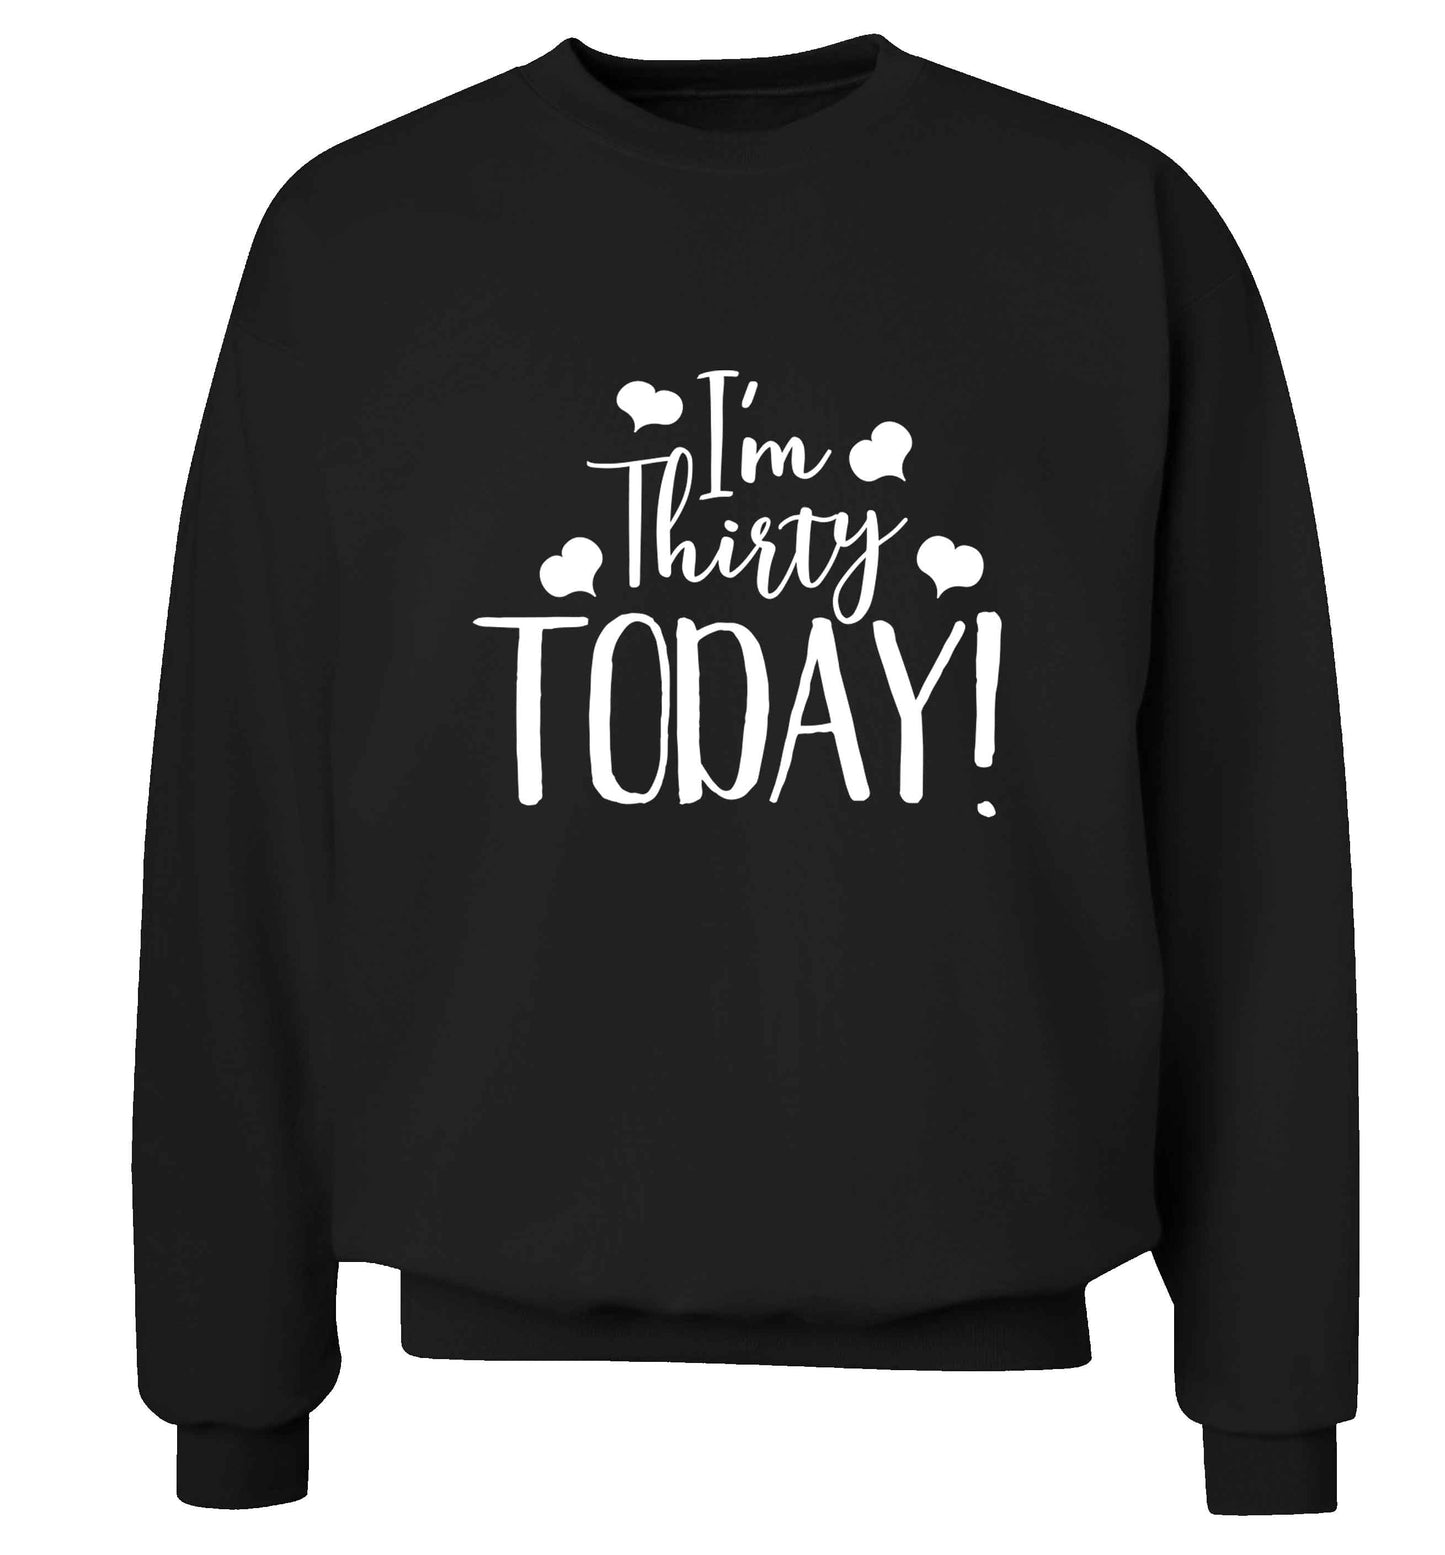 I'm thirty today! adult's unisex black sweater 2XL